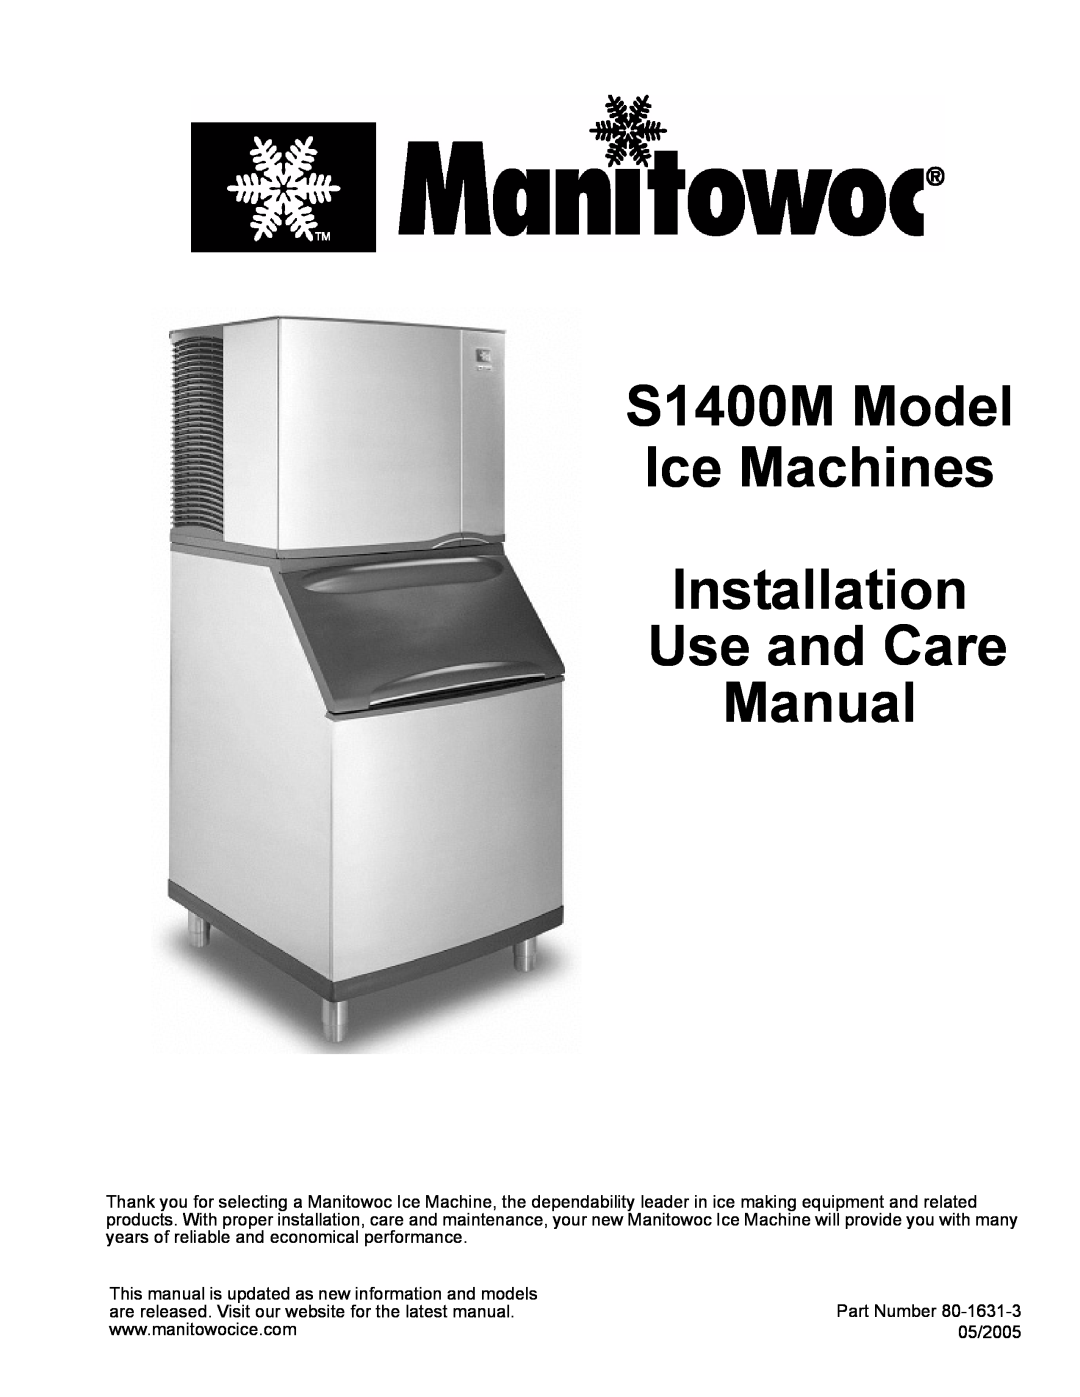 Manitowoc Ice manual S1400M Model Ice Machines Installation, Use and Care Manual 